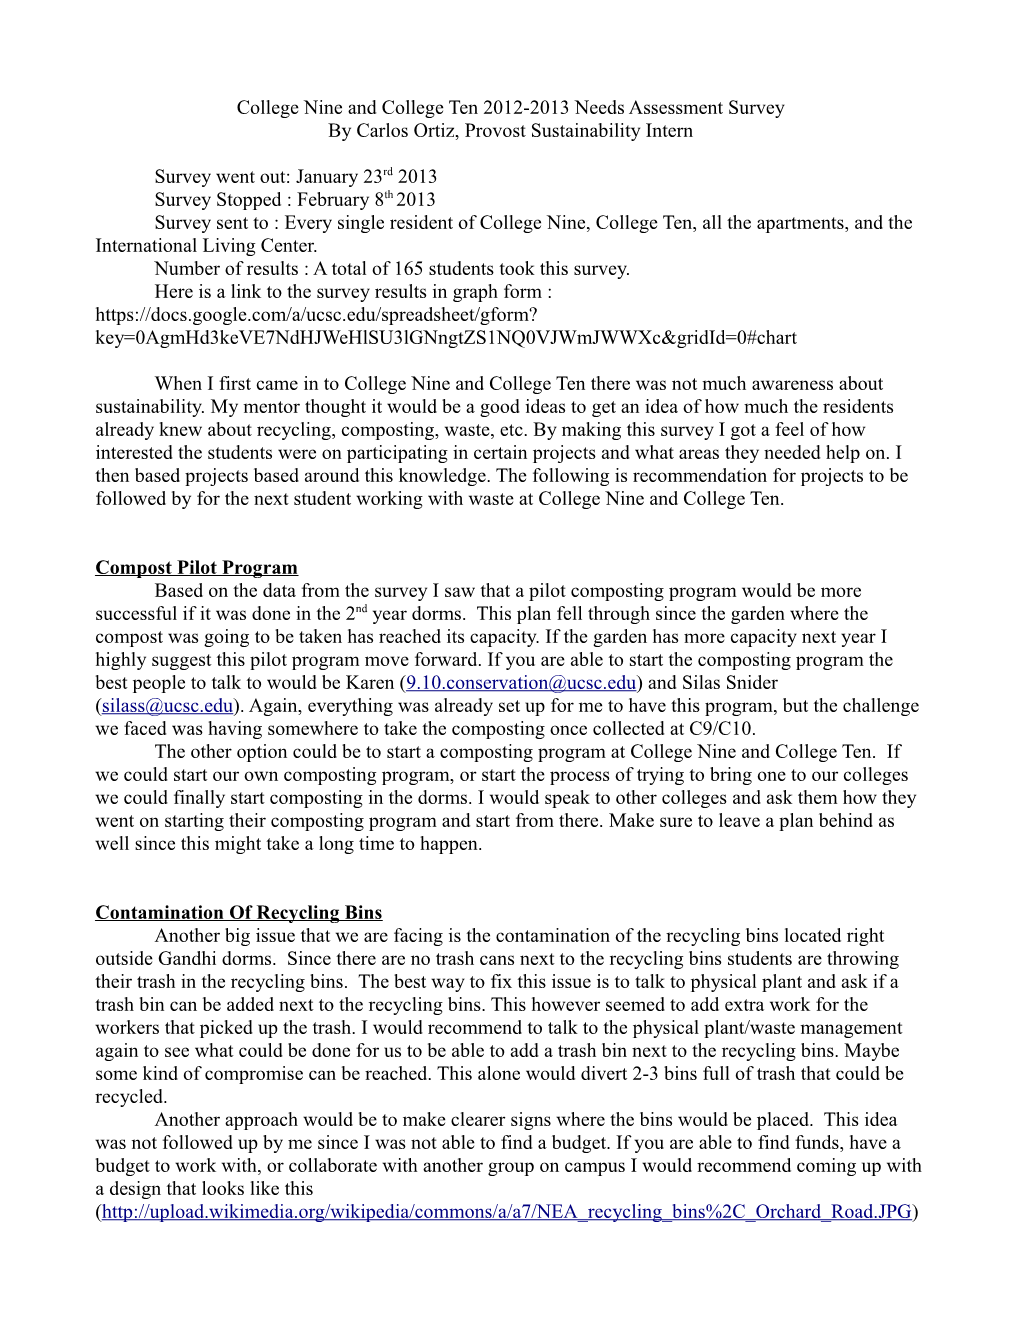 College Nine and College Ten 2012-2013 Needs Assessment Survey by Carlos Ortiz, Provost